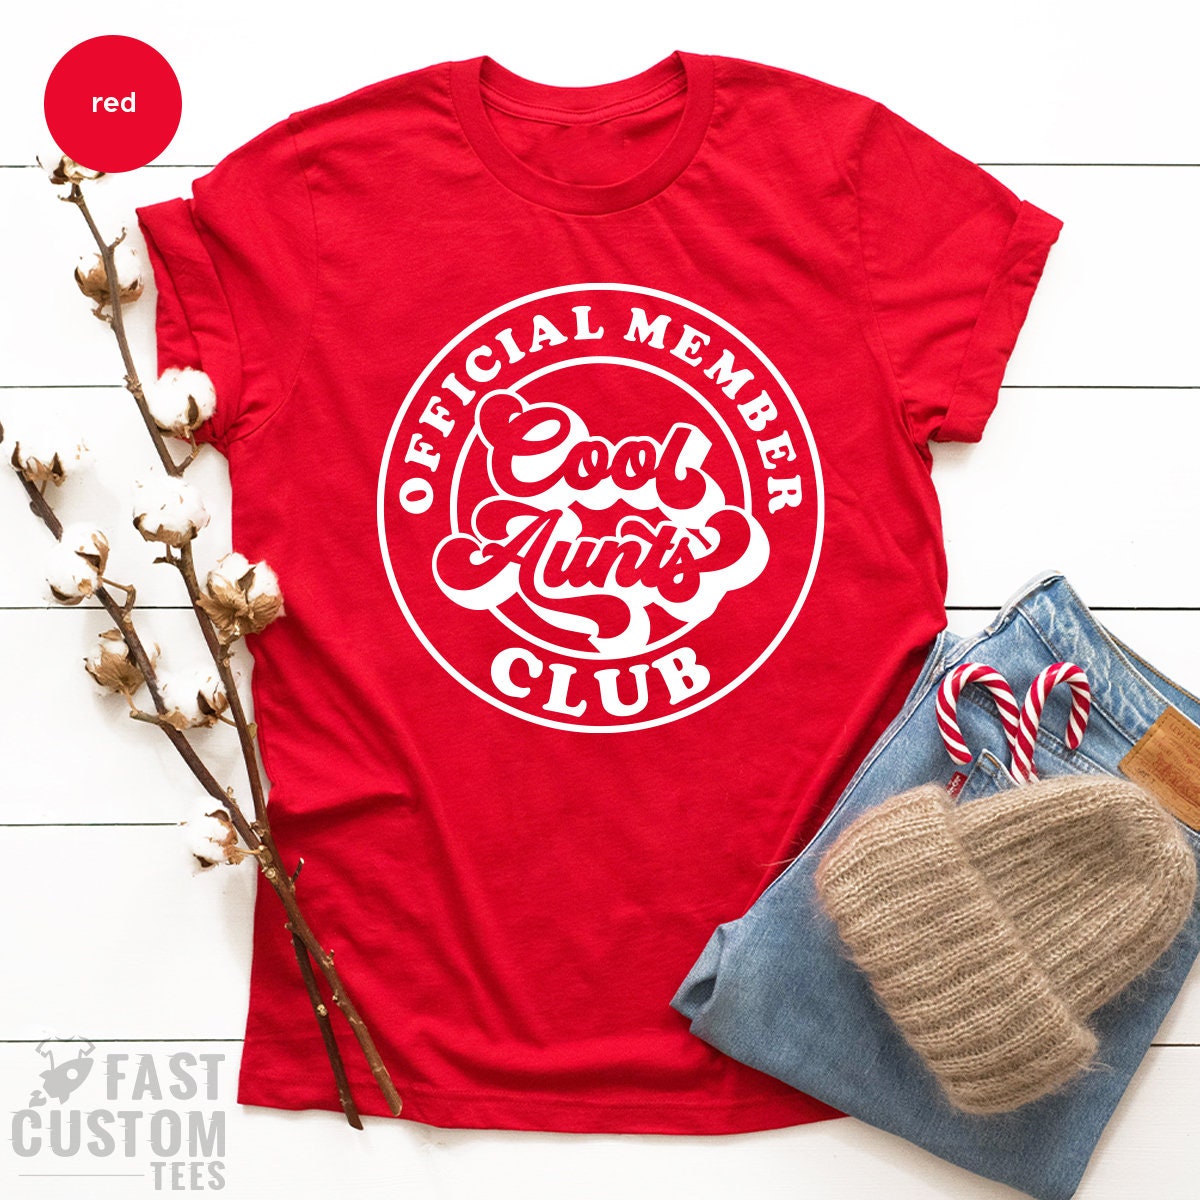 Cool Aunts Club Shirt, Gift For Auntie, Cool Sister Shirt, Best Aunt TShirt, Cute Aunt Gifts, Cool Aunt Shirt,Like A Mom Shirt,Family Tee - Fastdeliverytees.com